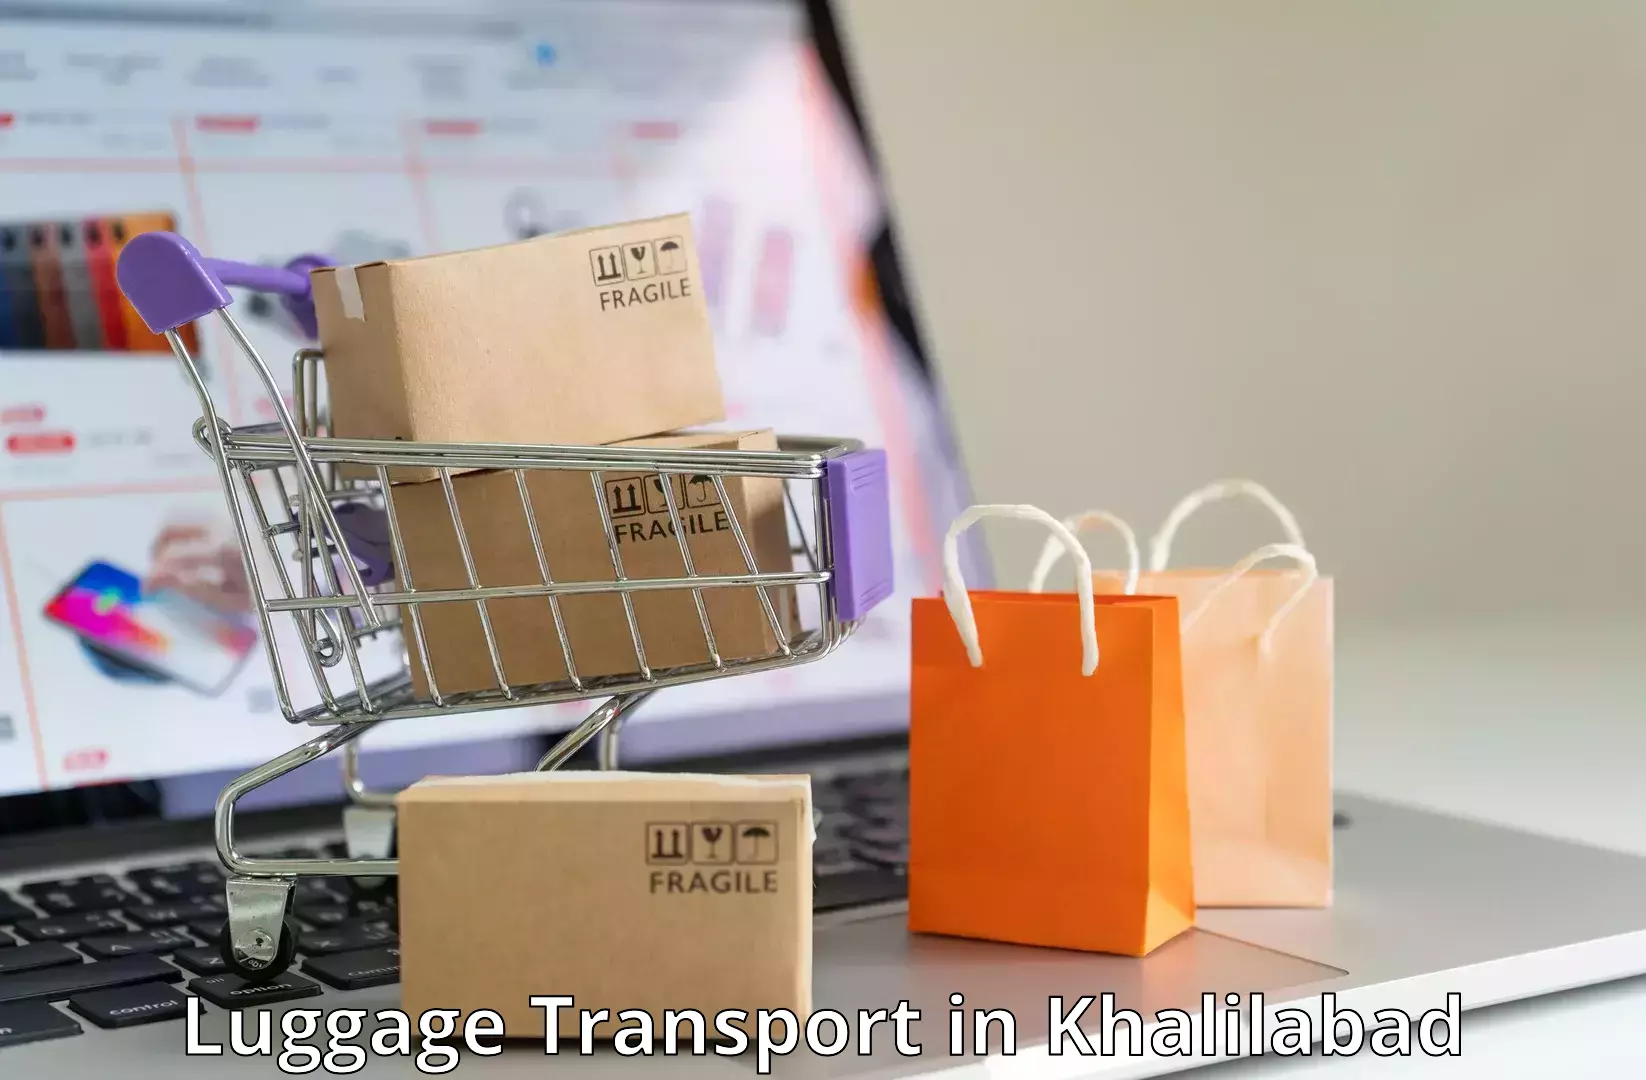 Tailored baggage transport in Khalilabad